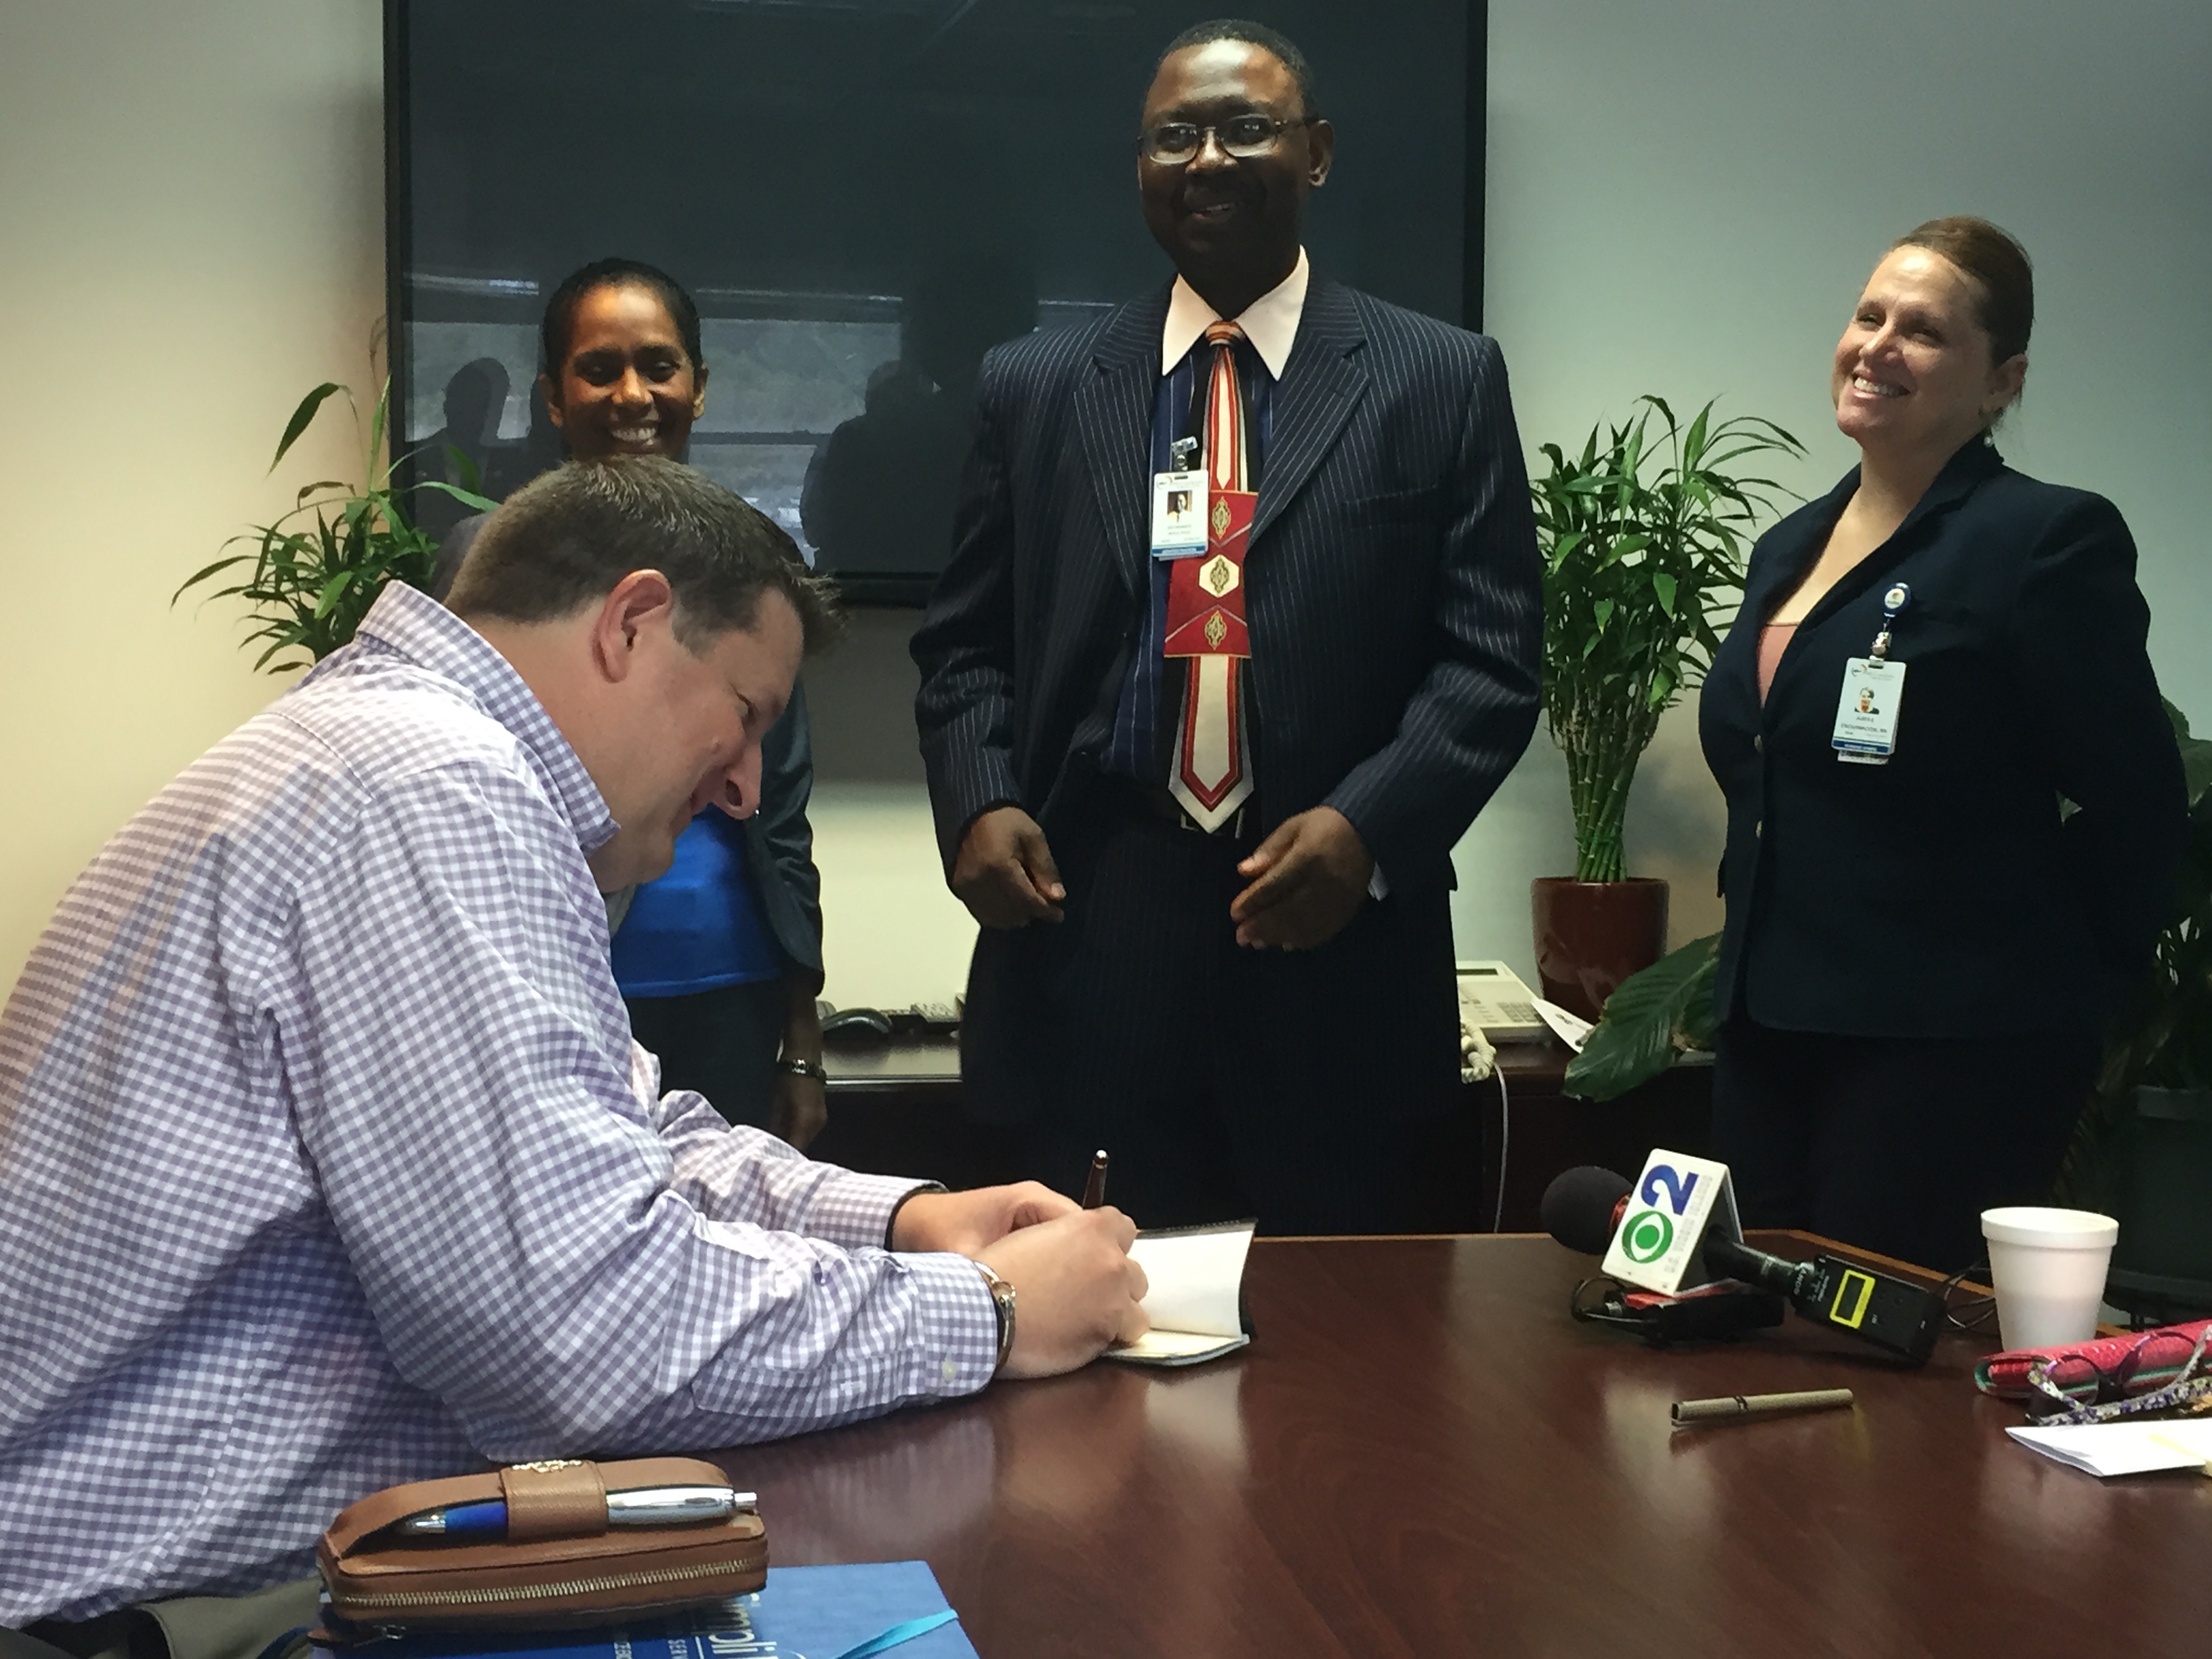 David A. Johnson, co-founder of St. Croix-based consulting firm Cane Bay Partners VI, signs a $25,000 donation to the Gov. Juan F. Luis Hospital on Wednesday, completing a $50,000 donation to the Wome